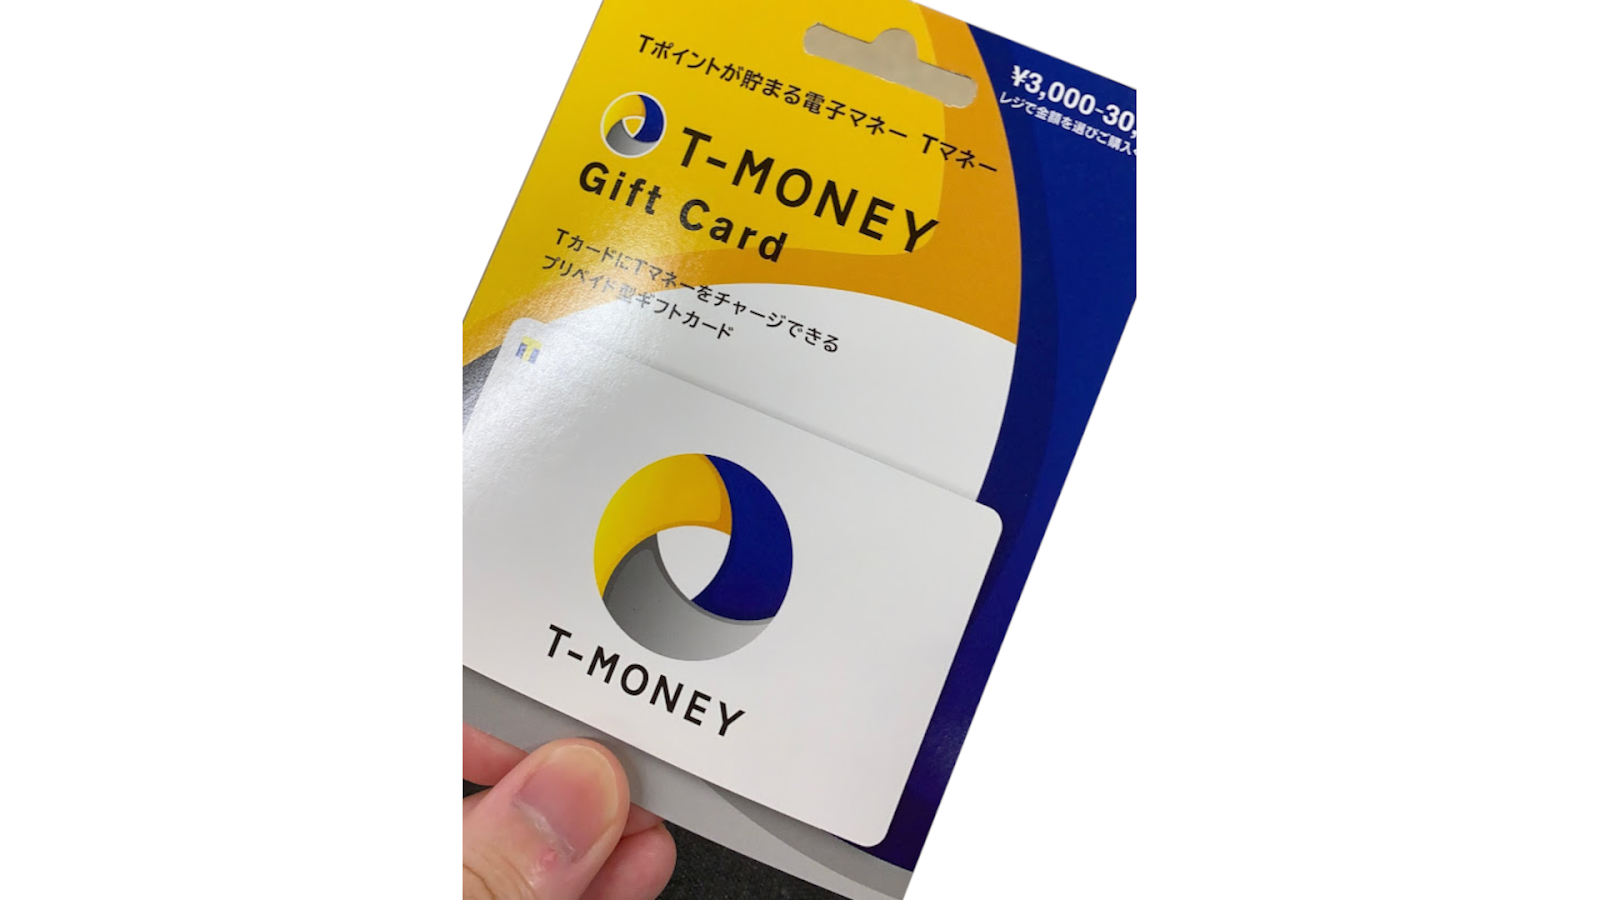 T-MONAY Gift Card